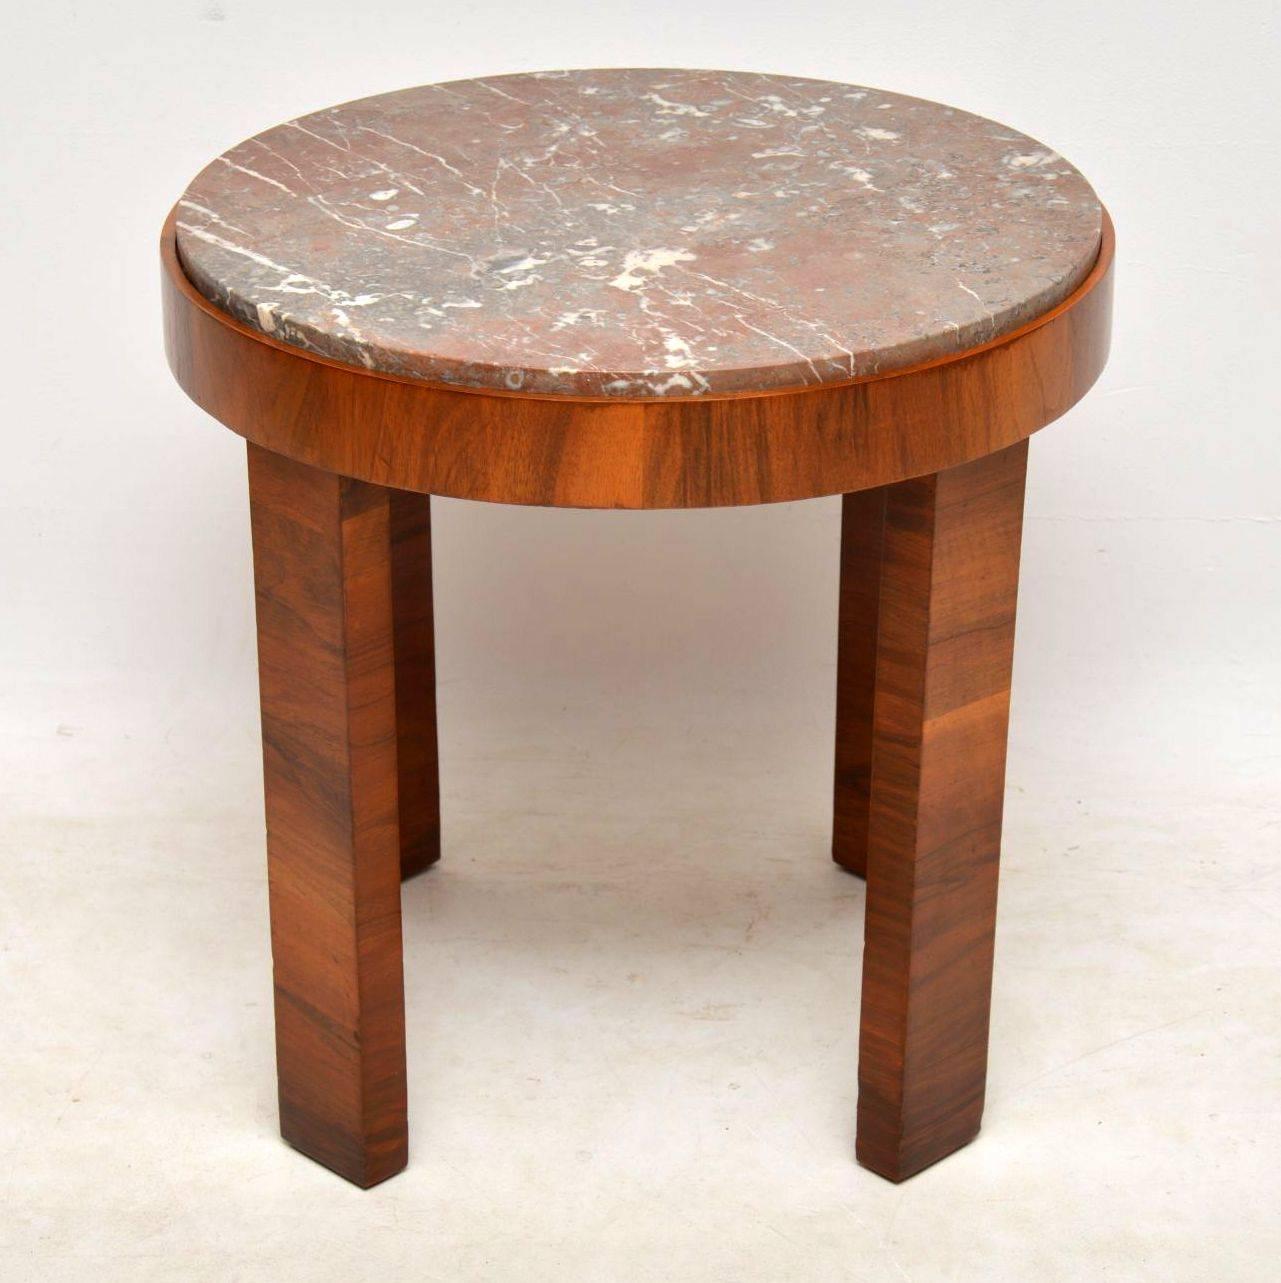 A beautiful and very stylish vintage coffee table from the Art Deco period, this dates from the 1920s-1930s. We have had the walnut frame stripped and re-polished to a very high standard, it is in lovely condition with a great color and stunning